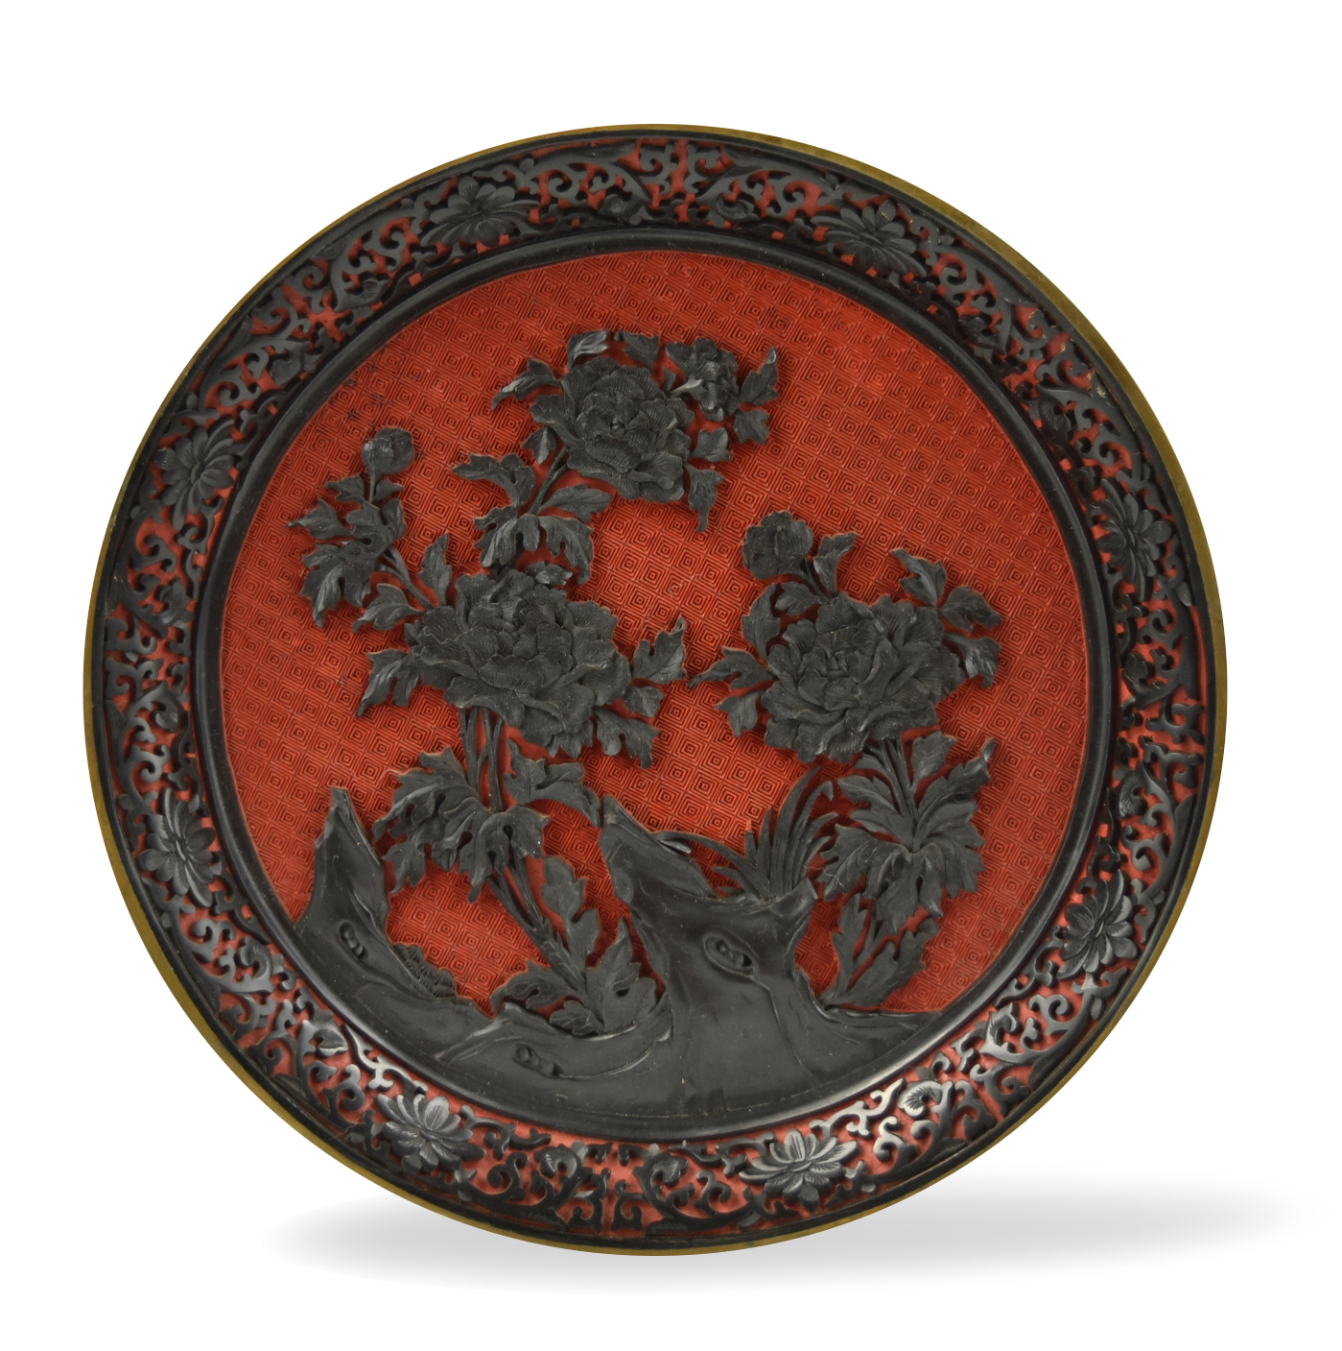 CHINESE LACQUER PLATE,20TH C. Chinese